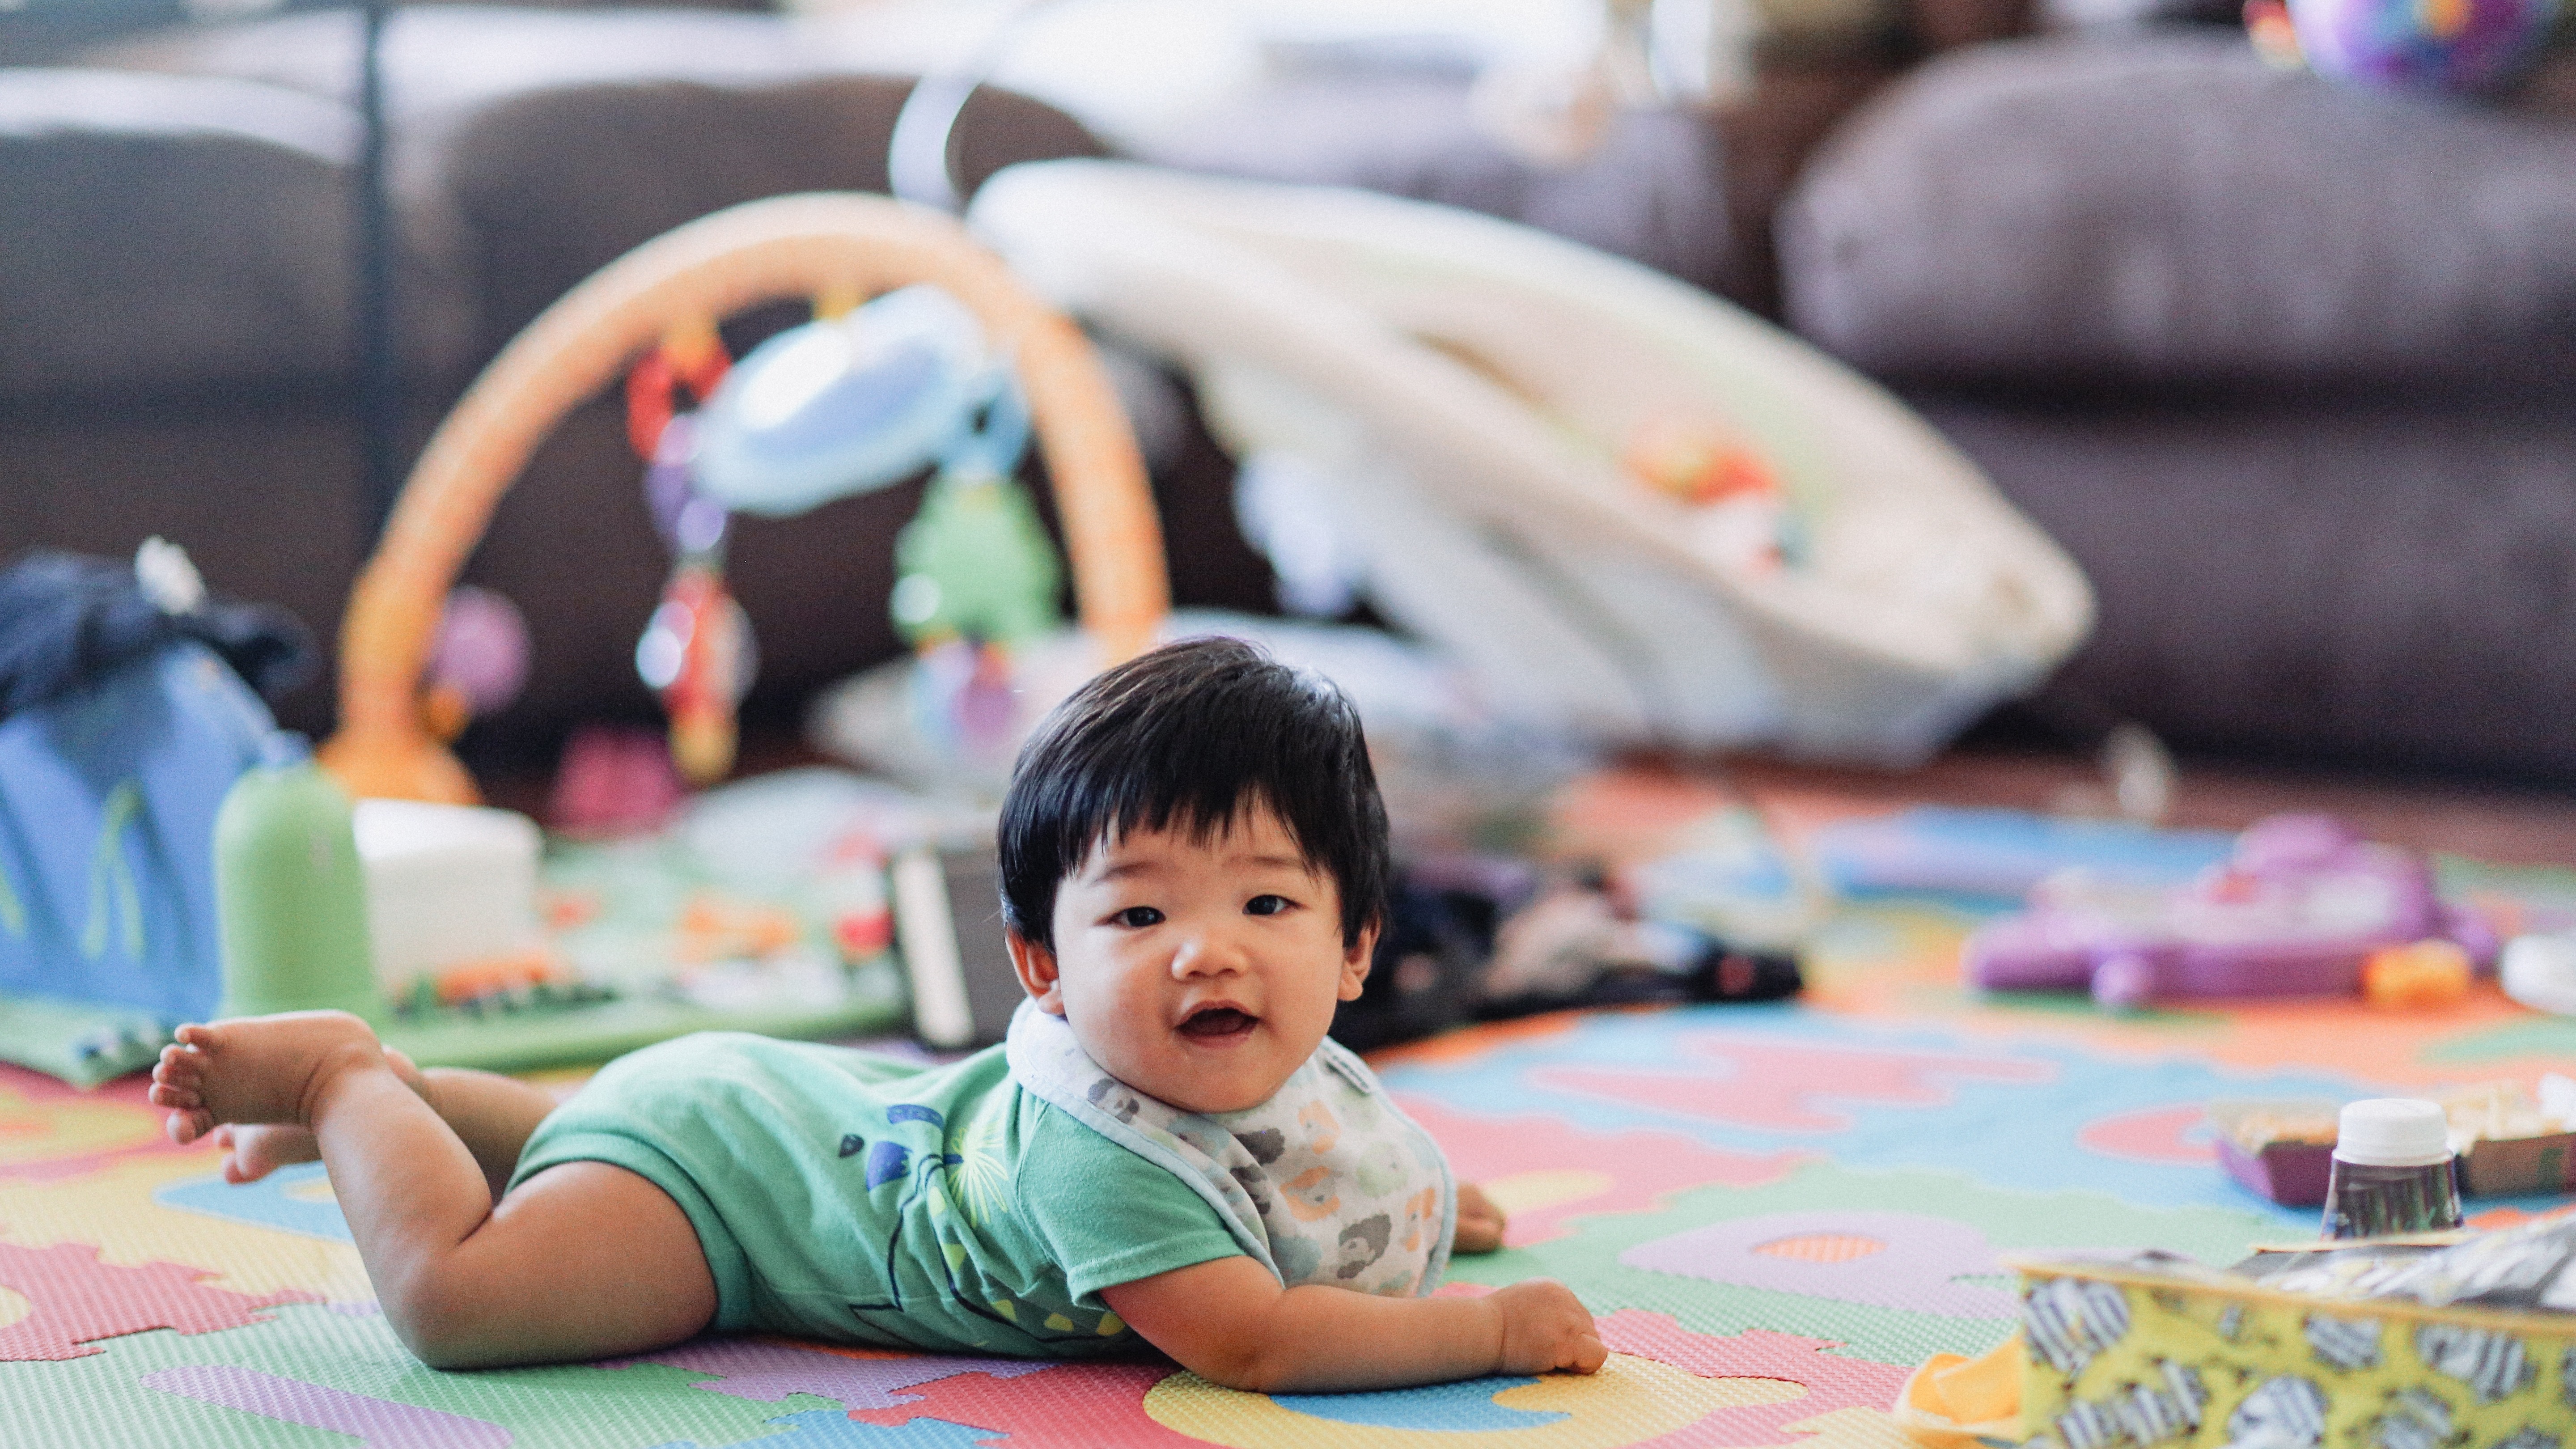 Tummy time for your baby: advice from a pediatric OT